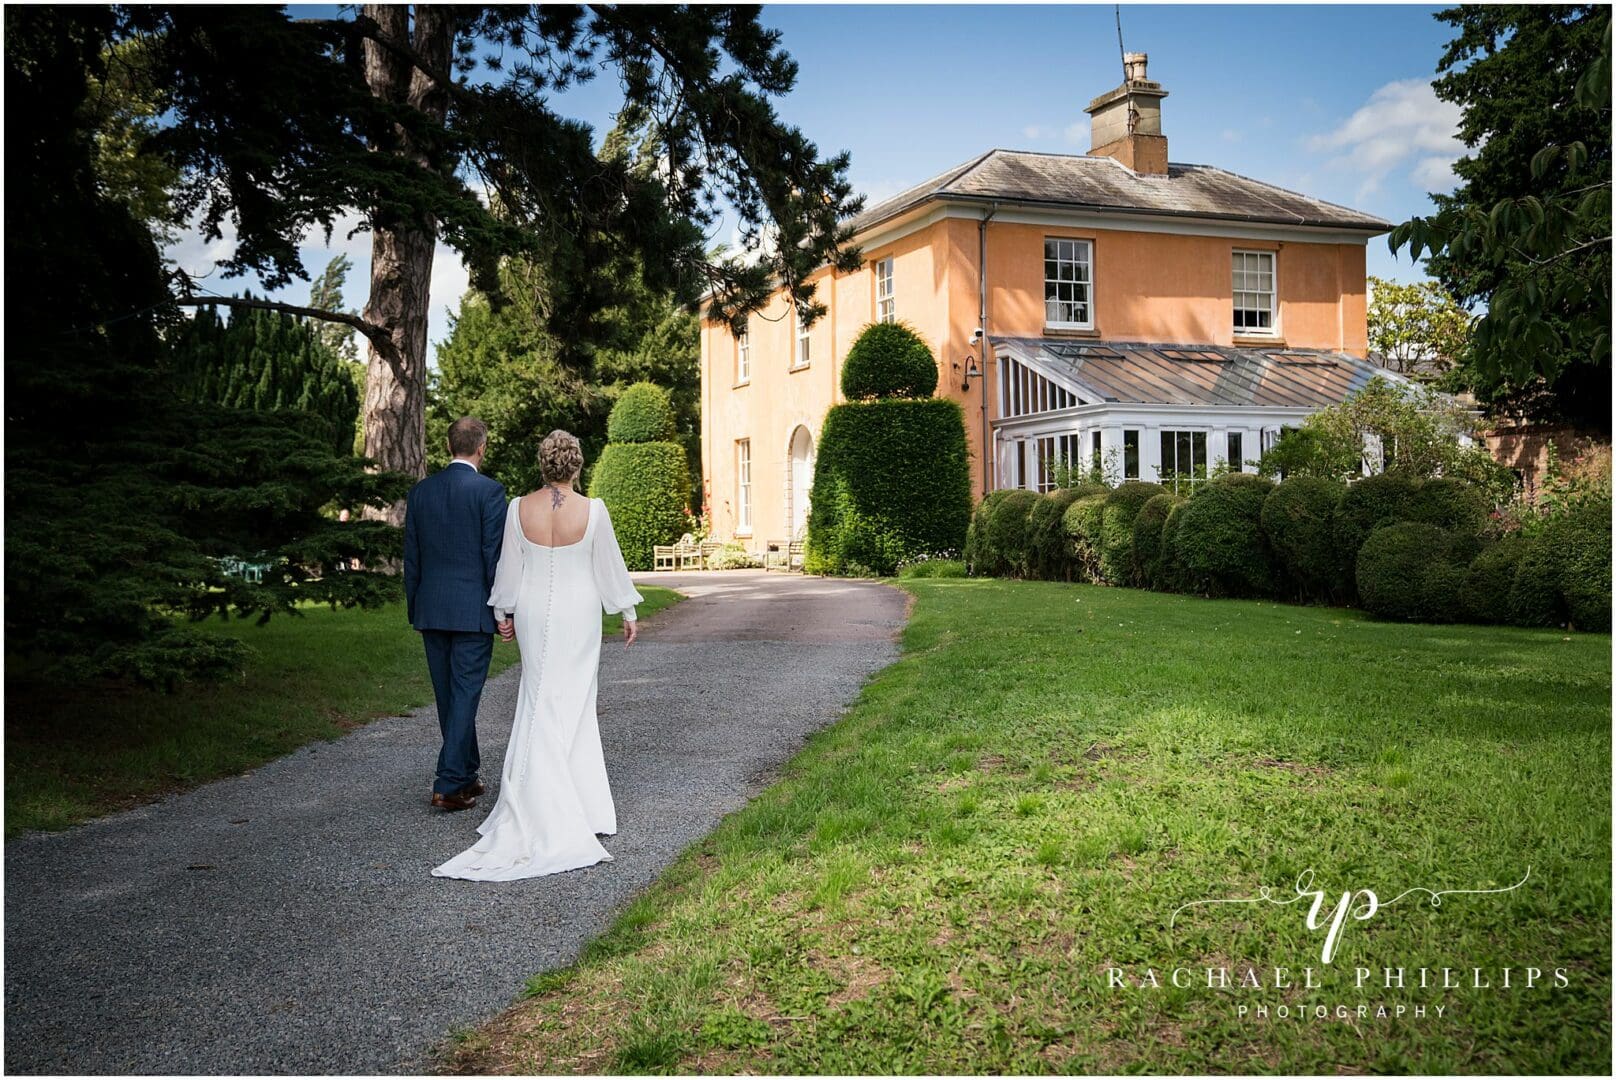 The bride and groom are walking up the drive way 
 and beautiful grounds to the front of Langar Hall in Nottingham.